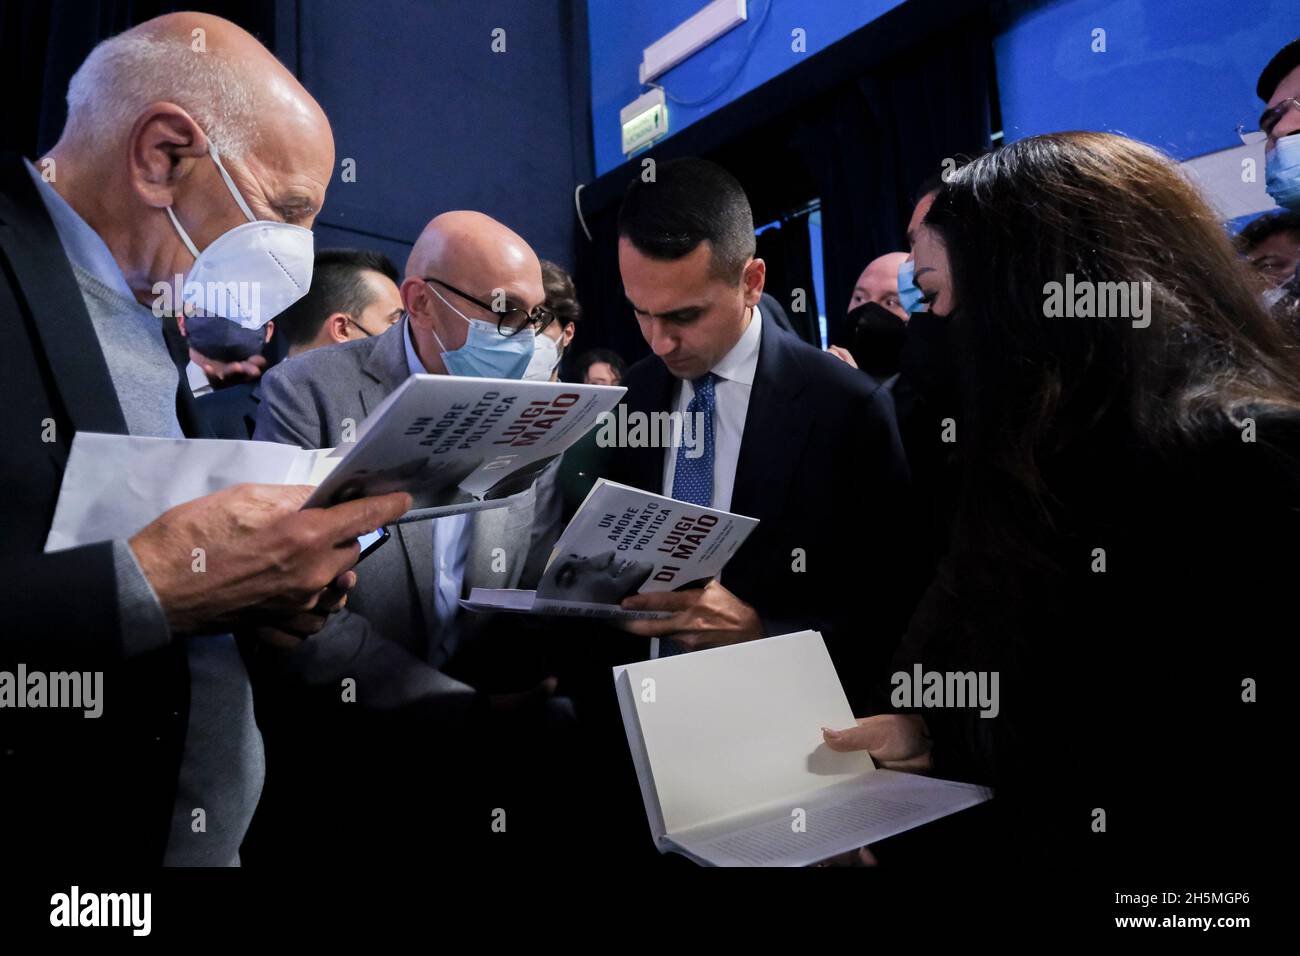 Luigi Di Maio, Minister for Foreign Affairs and International Cooperation during the signing of his book Un Amore Chiamato Politica (A Love Called Politics) on stage at the Cinema Teatro Gloria in Pomigliano d'Arco, his hometown. Stock Photo